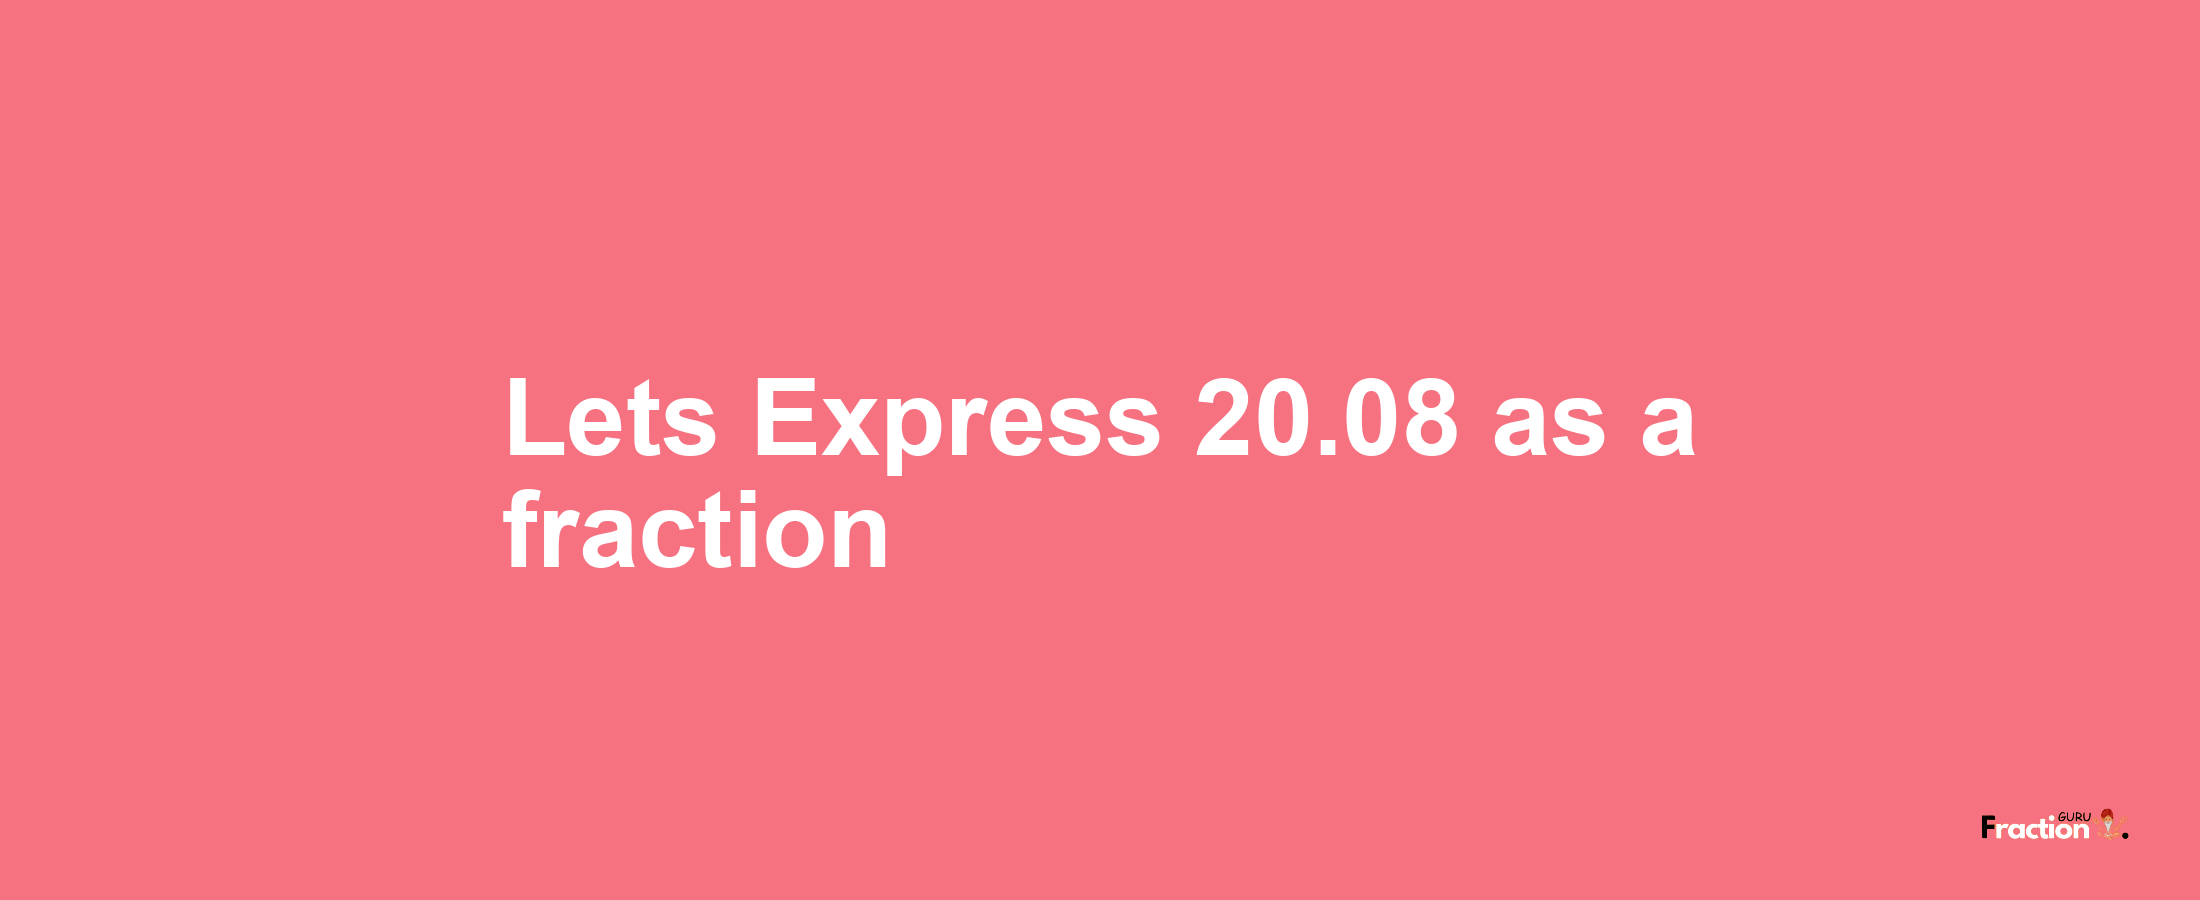 Lets Express 20.08 as afraction